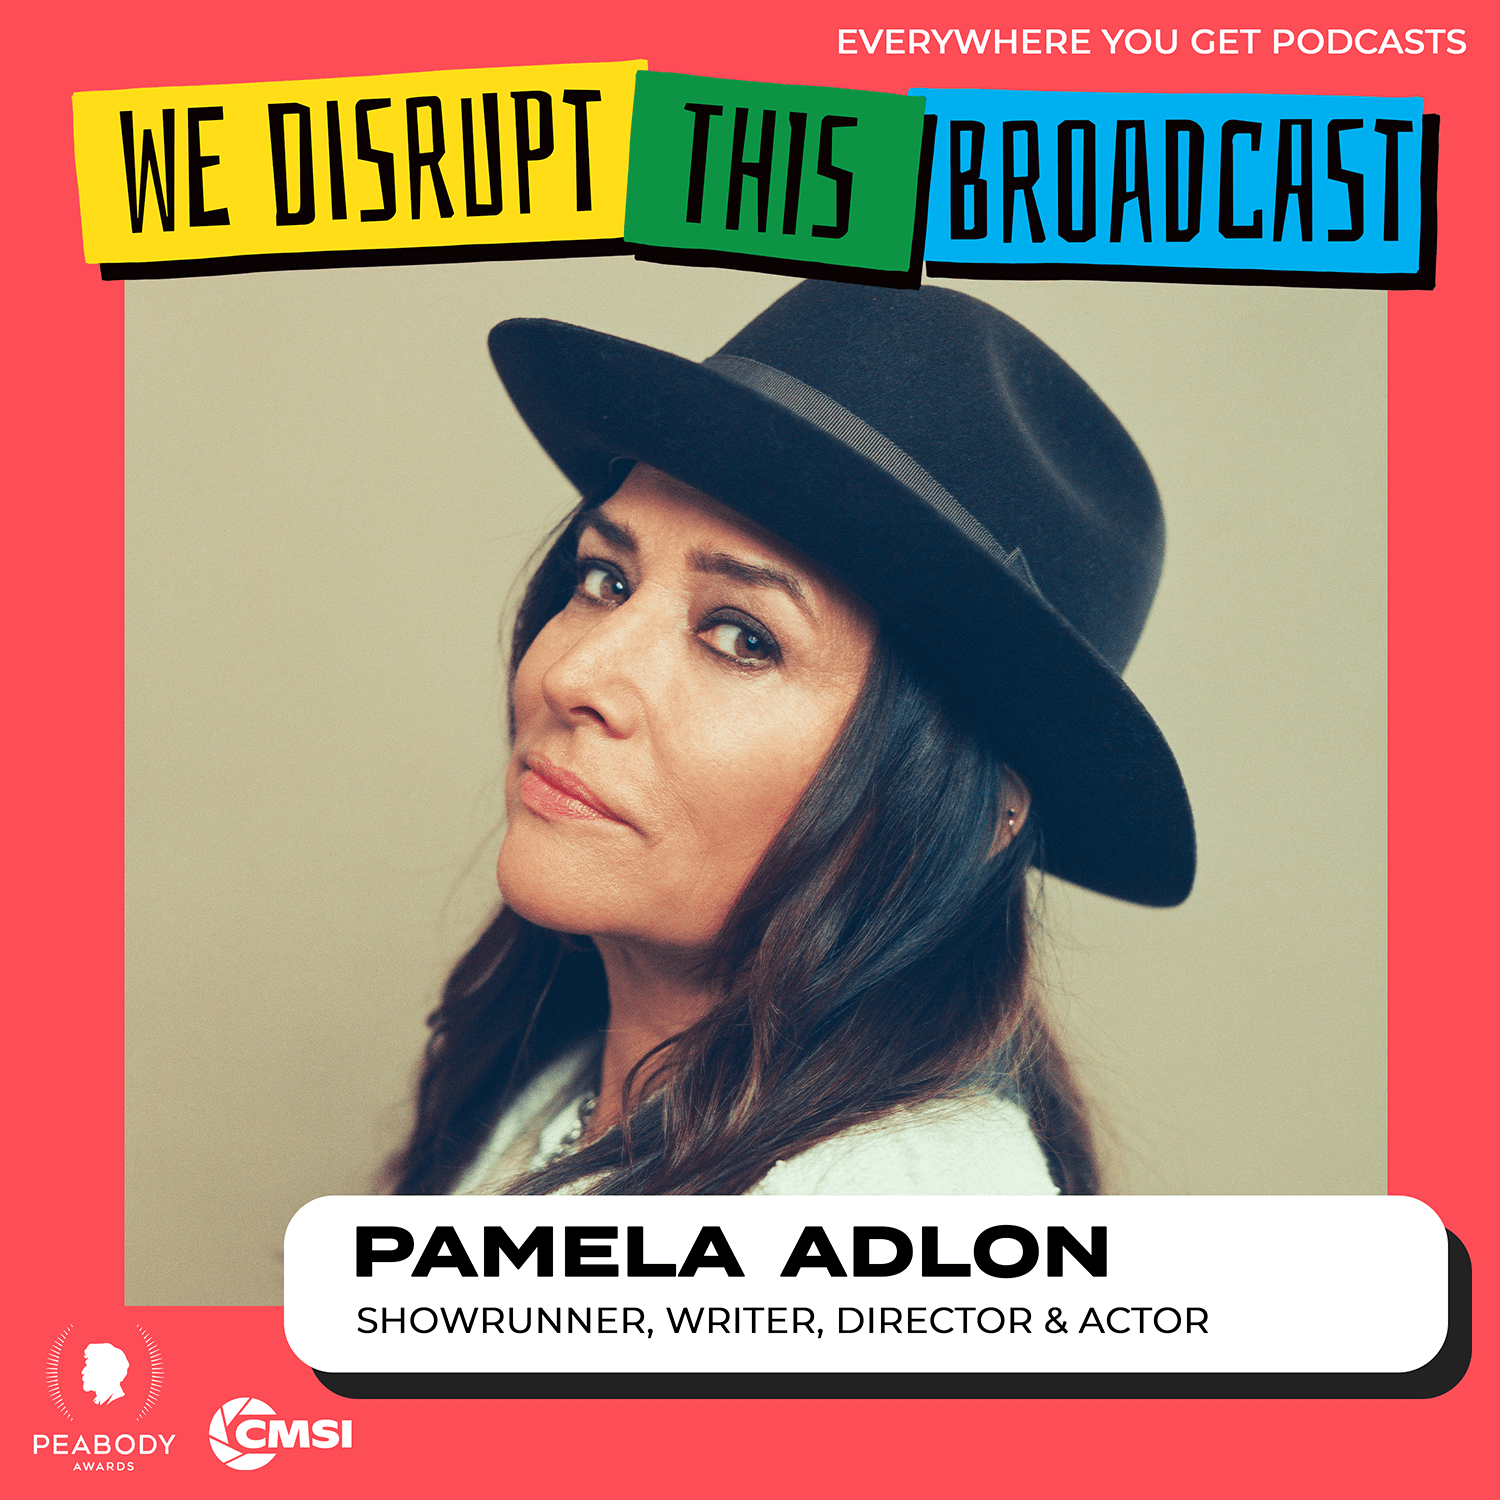 Pamela Adlon - We Disrupt This Broadcast Podcast Cover